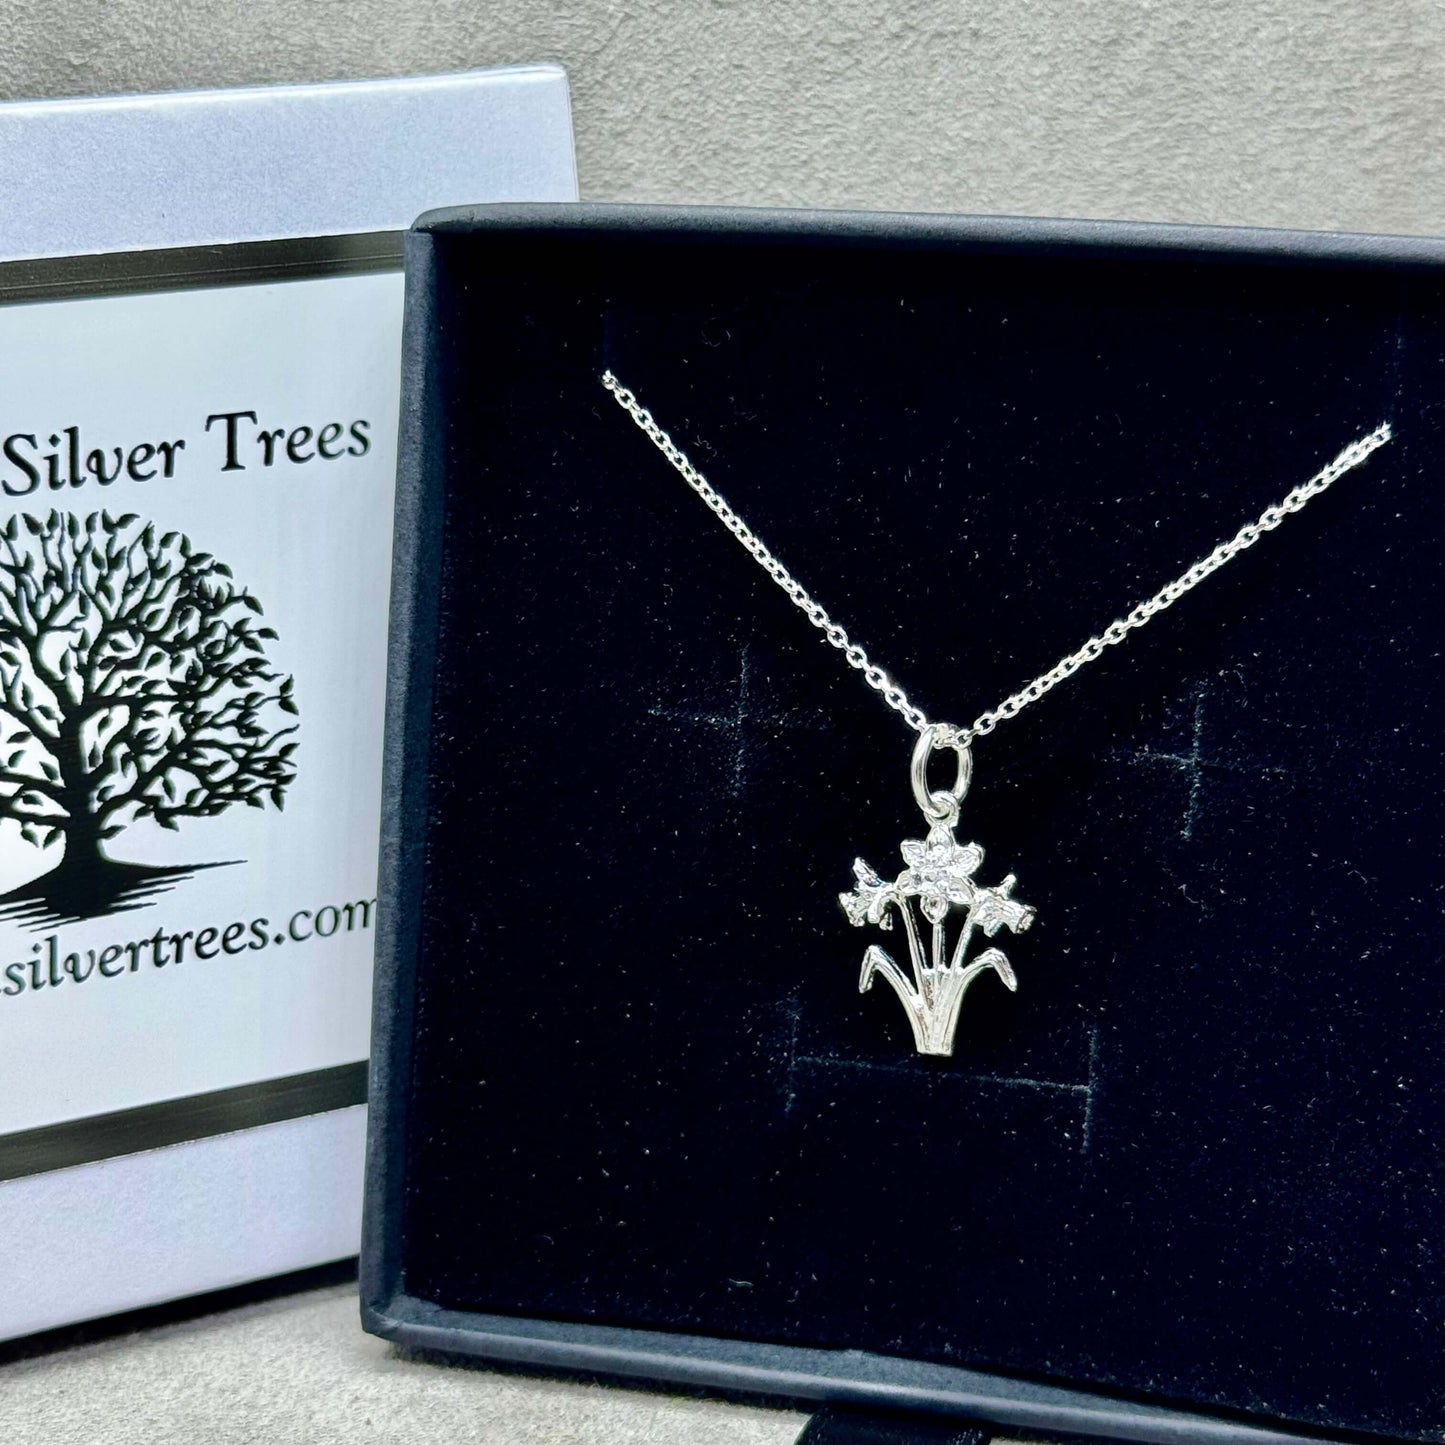 Welsh Daffodil Sterling Silver Charm Necklace - Twelve Silver Trees